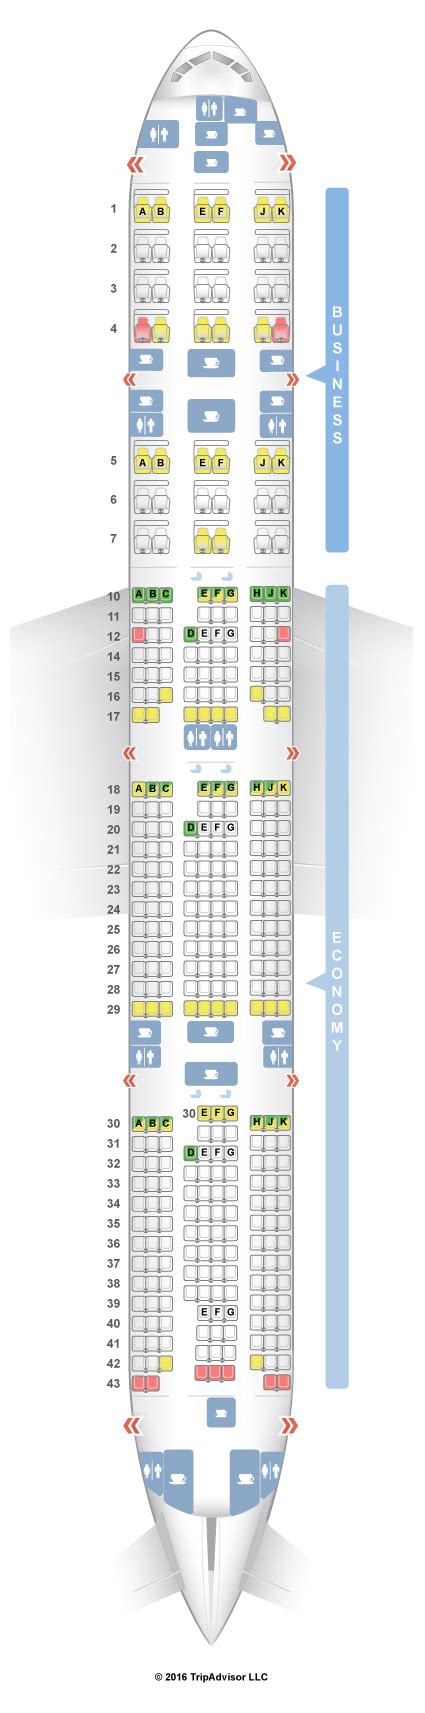 Seat map for qatar airways. Qatar Airways operates the A321 on short-haul flights, within the Gulf region. This aicraft flies with 12 seats of Business Class and 165 seats of Economy Class. There may be limited storage space in the overhead bins located in the last two rows since these are used to store emergency equipment. 